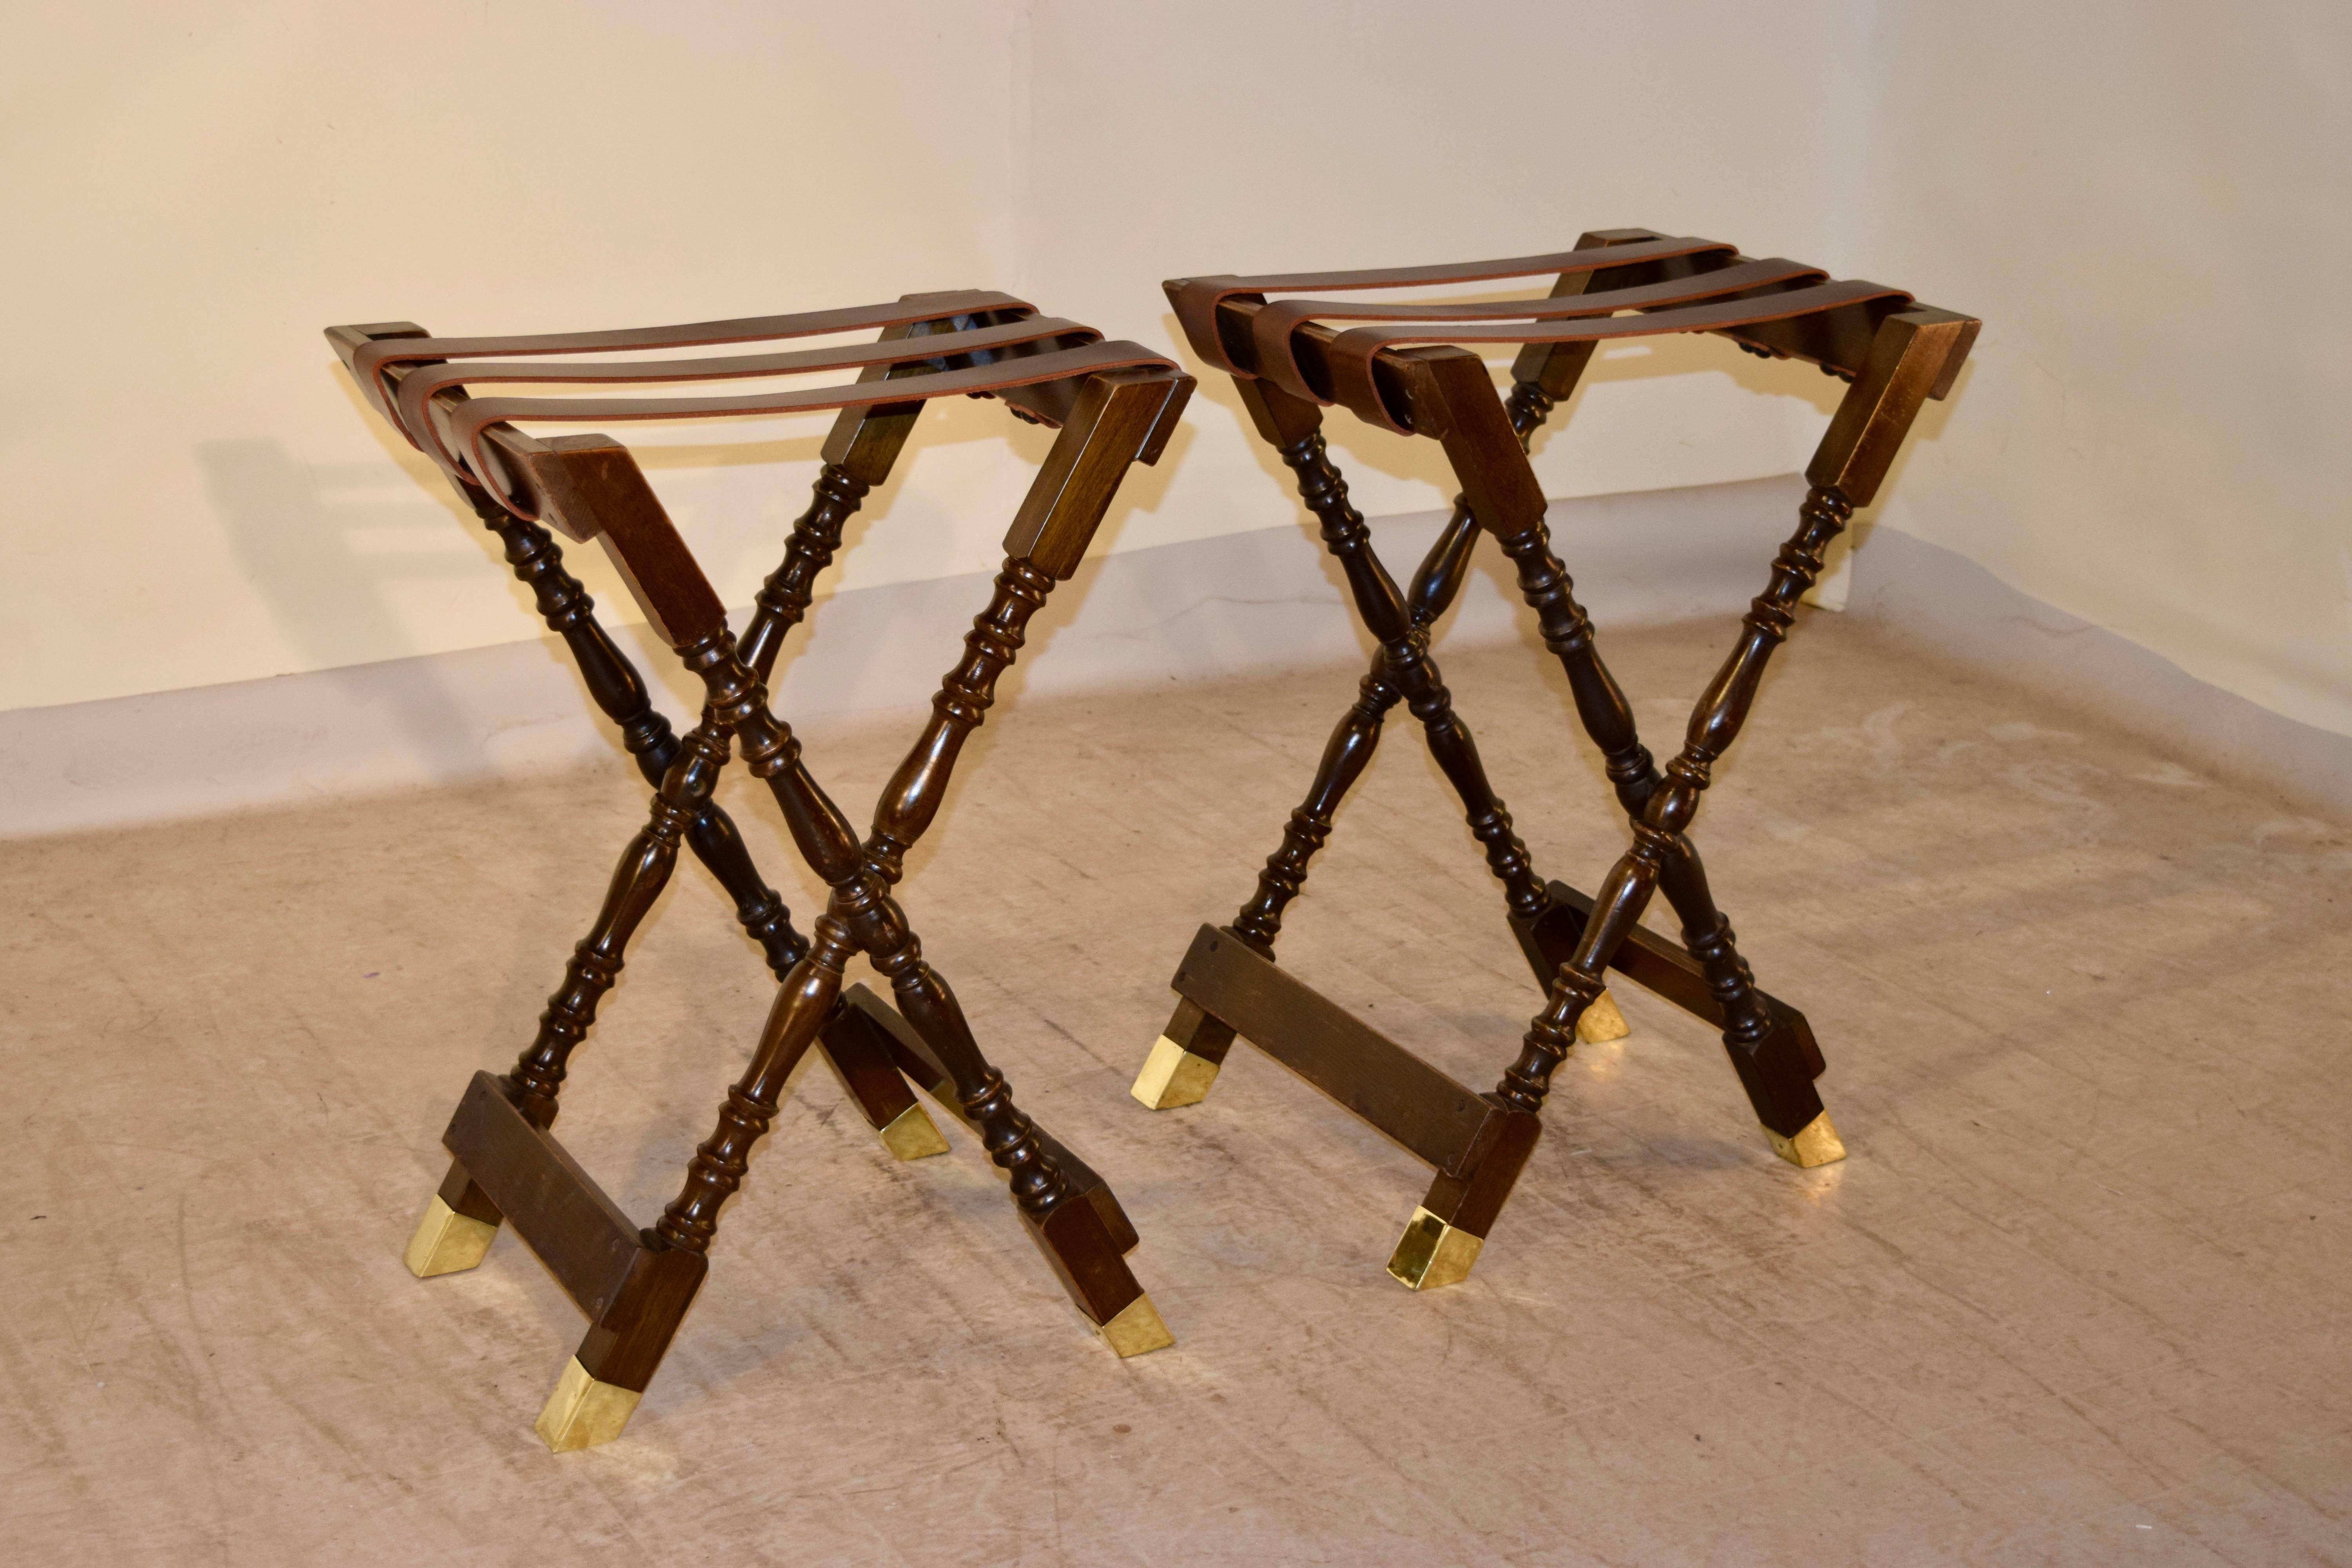 Pair of mahogany tray stands from England, circa 1920. The frames are hand-turned and have leather straps on the top and the feet are capped in brass. The stands open measure 21.25 W x 18.13 D x 30.25 H.